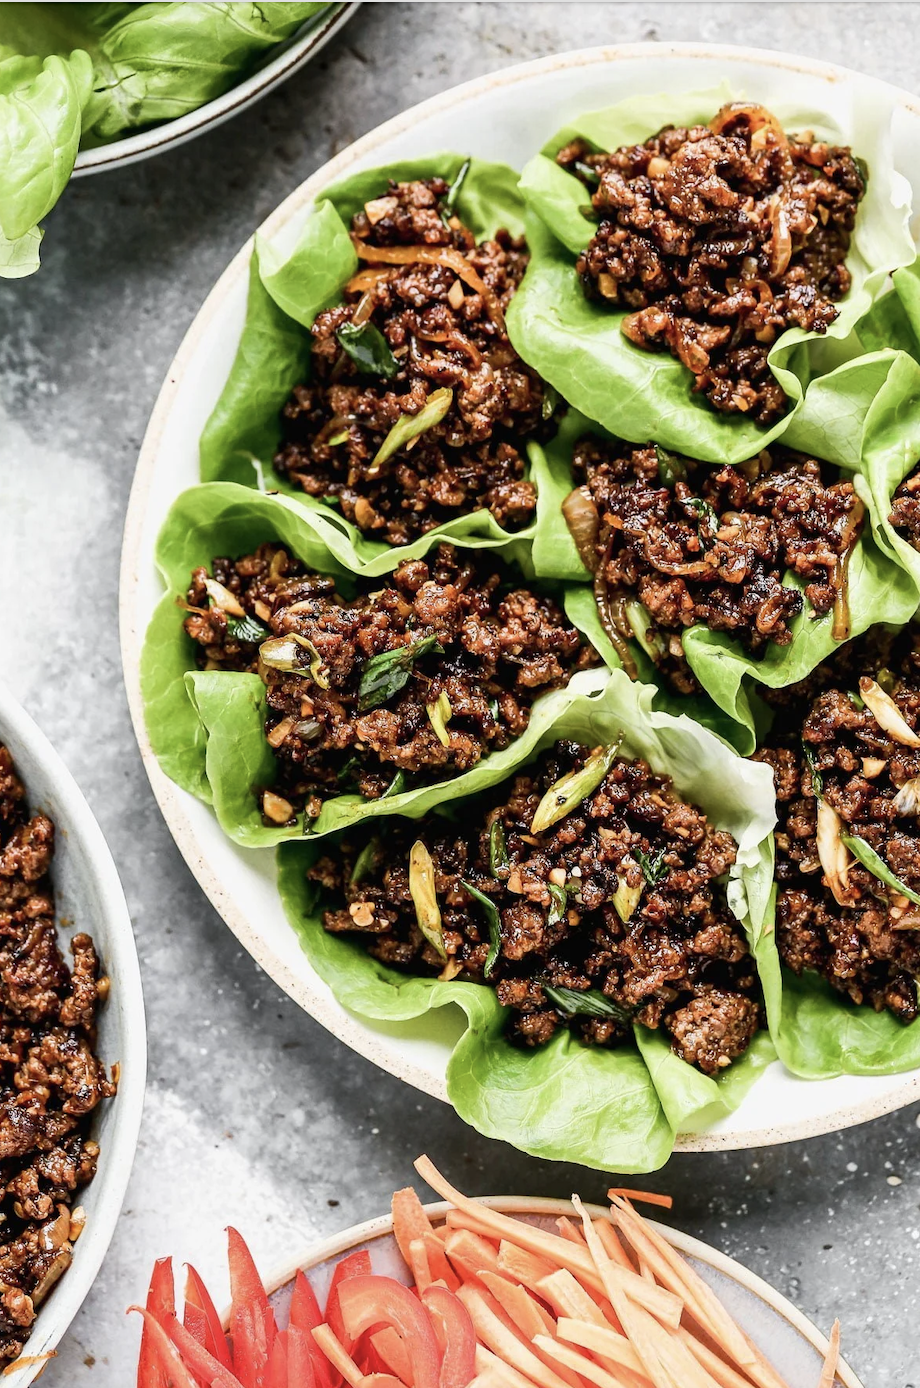 A dish with minced meat and herbs served in lettuce cups